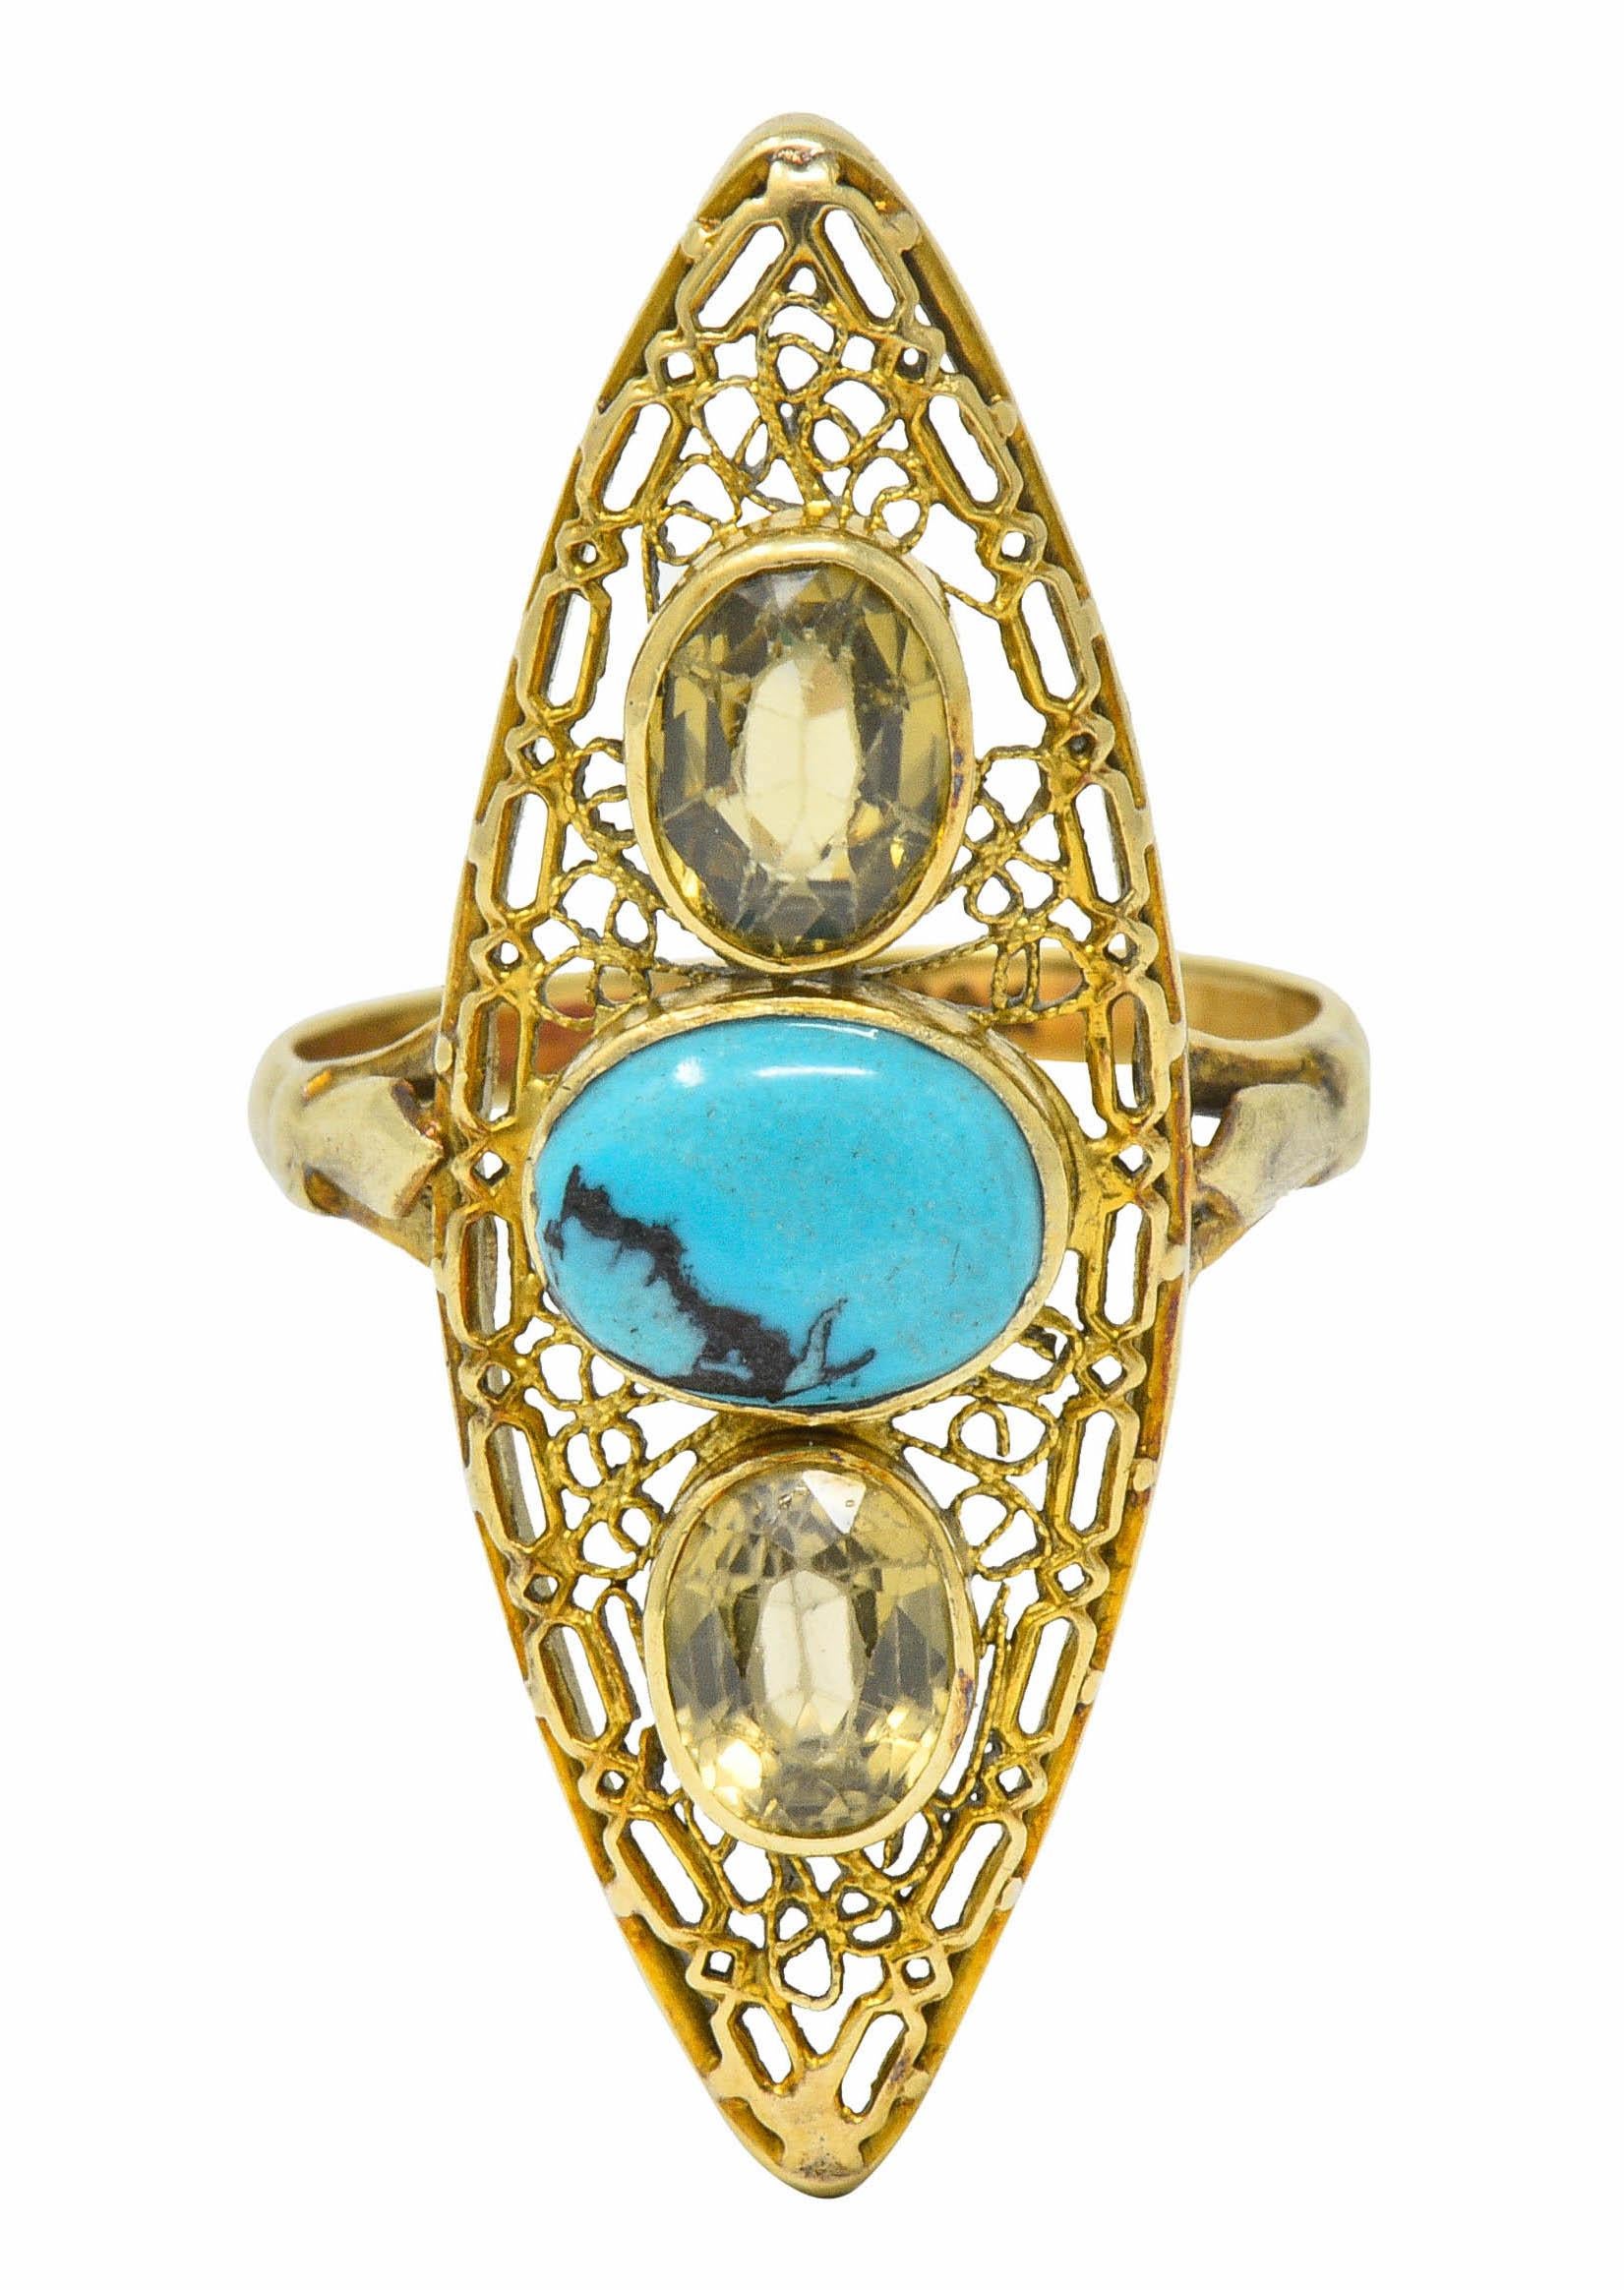 Intricately pierced navette shaped mounting with stylized shoulders

Centering an oval turquoise cabochon measuring approximately 8.0 x 6.0 mm; robin's egg blue color with black matrix

Flanked North and South by oval cut zircon measuring